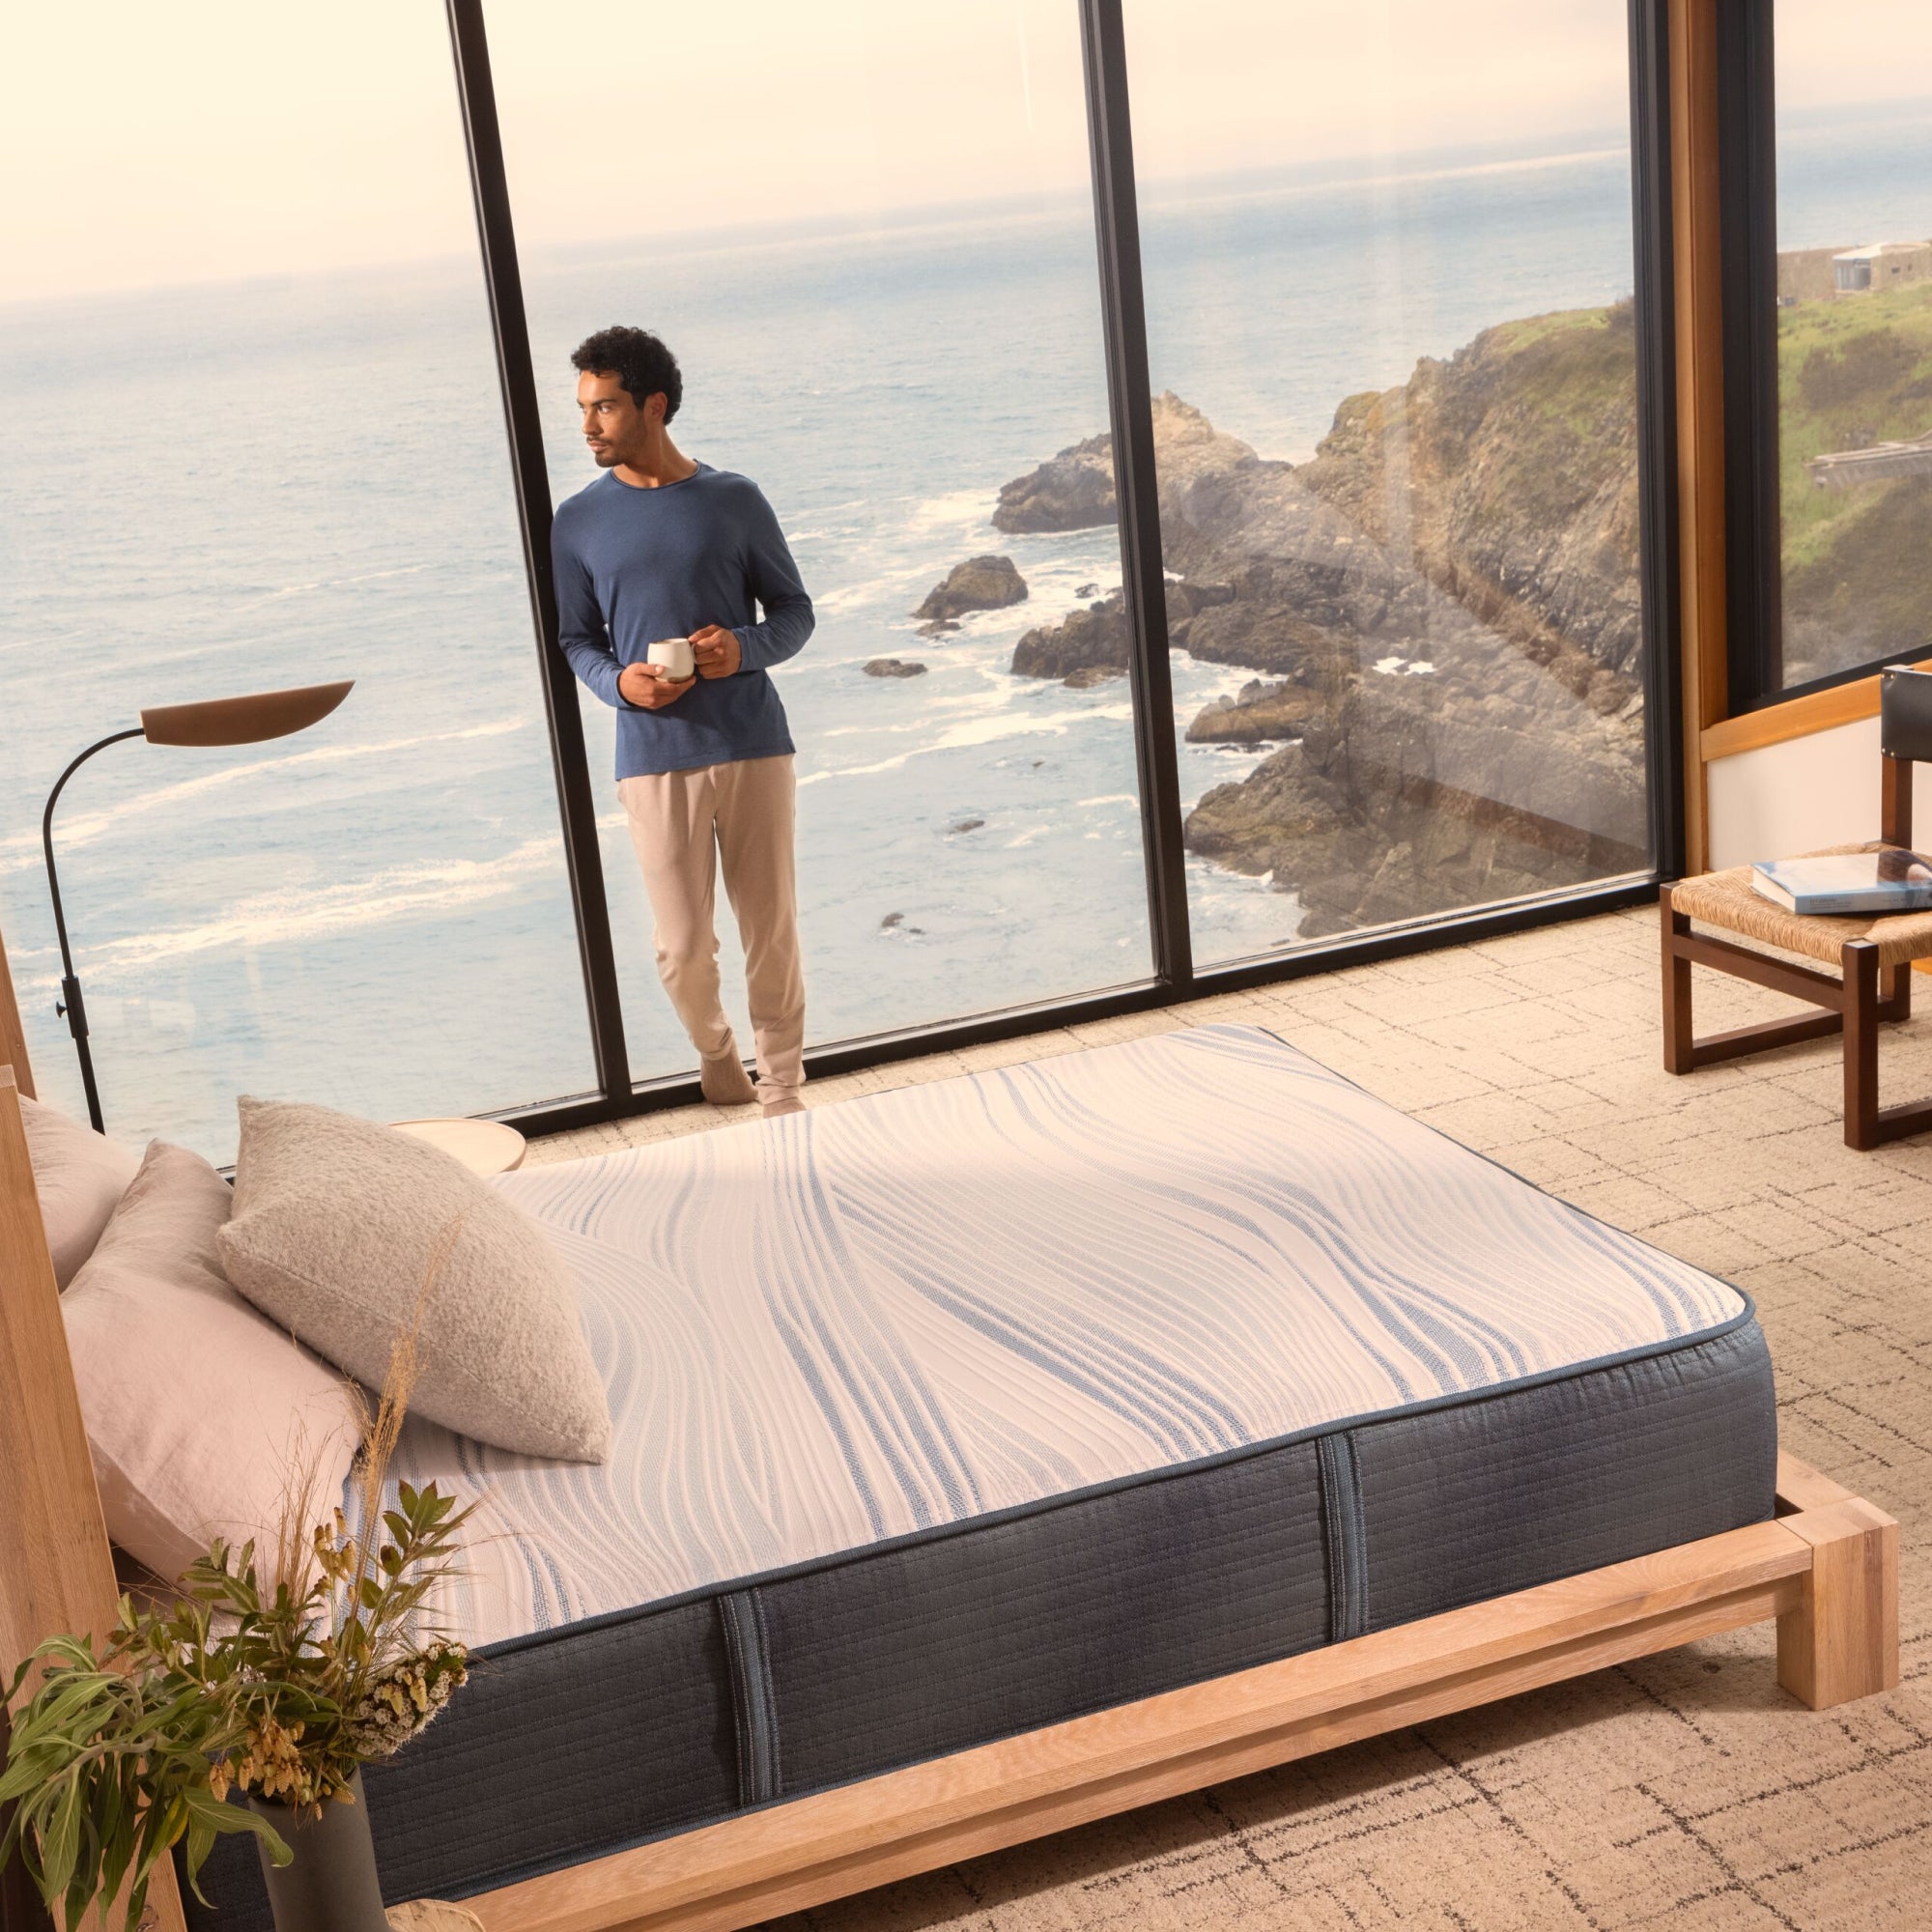 A man looking out the window at the beach, next to a Beautyrest Harmony hybrid Exceptional Driftwood Bay mattress || series: Exceptional Driftwood Bay